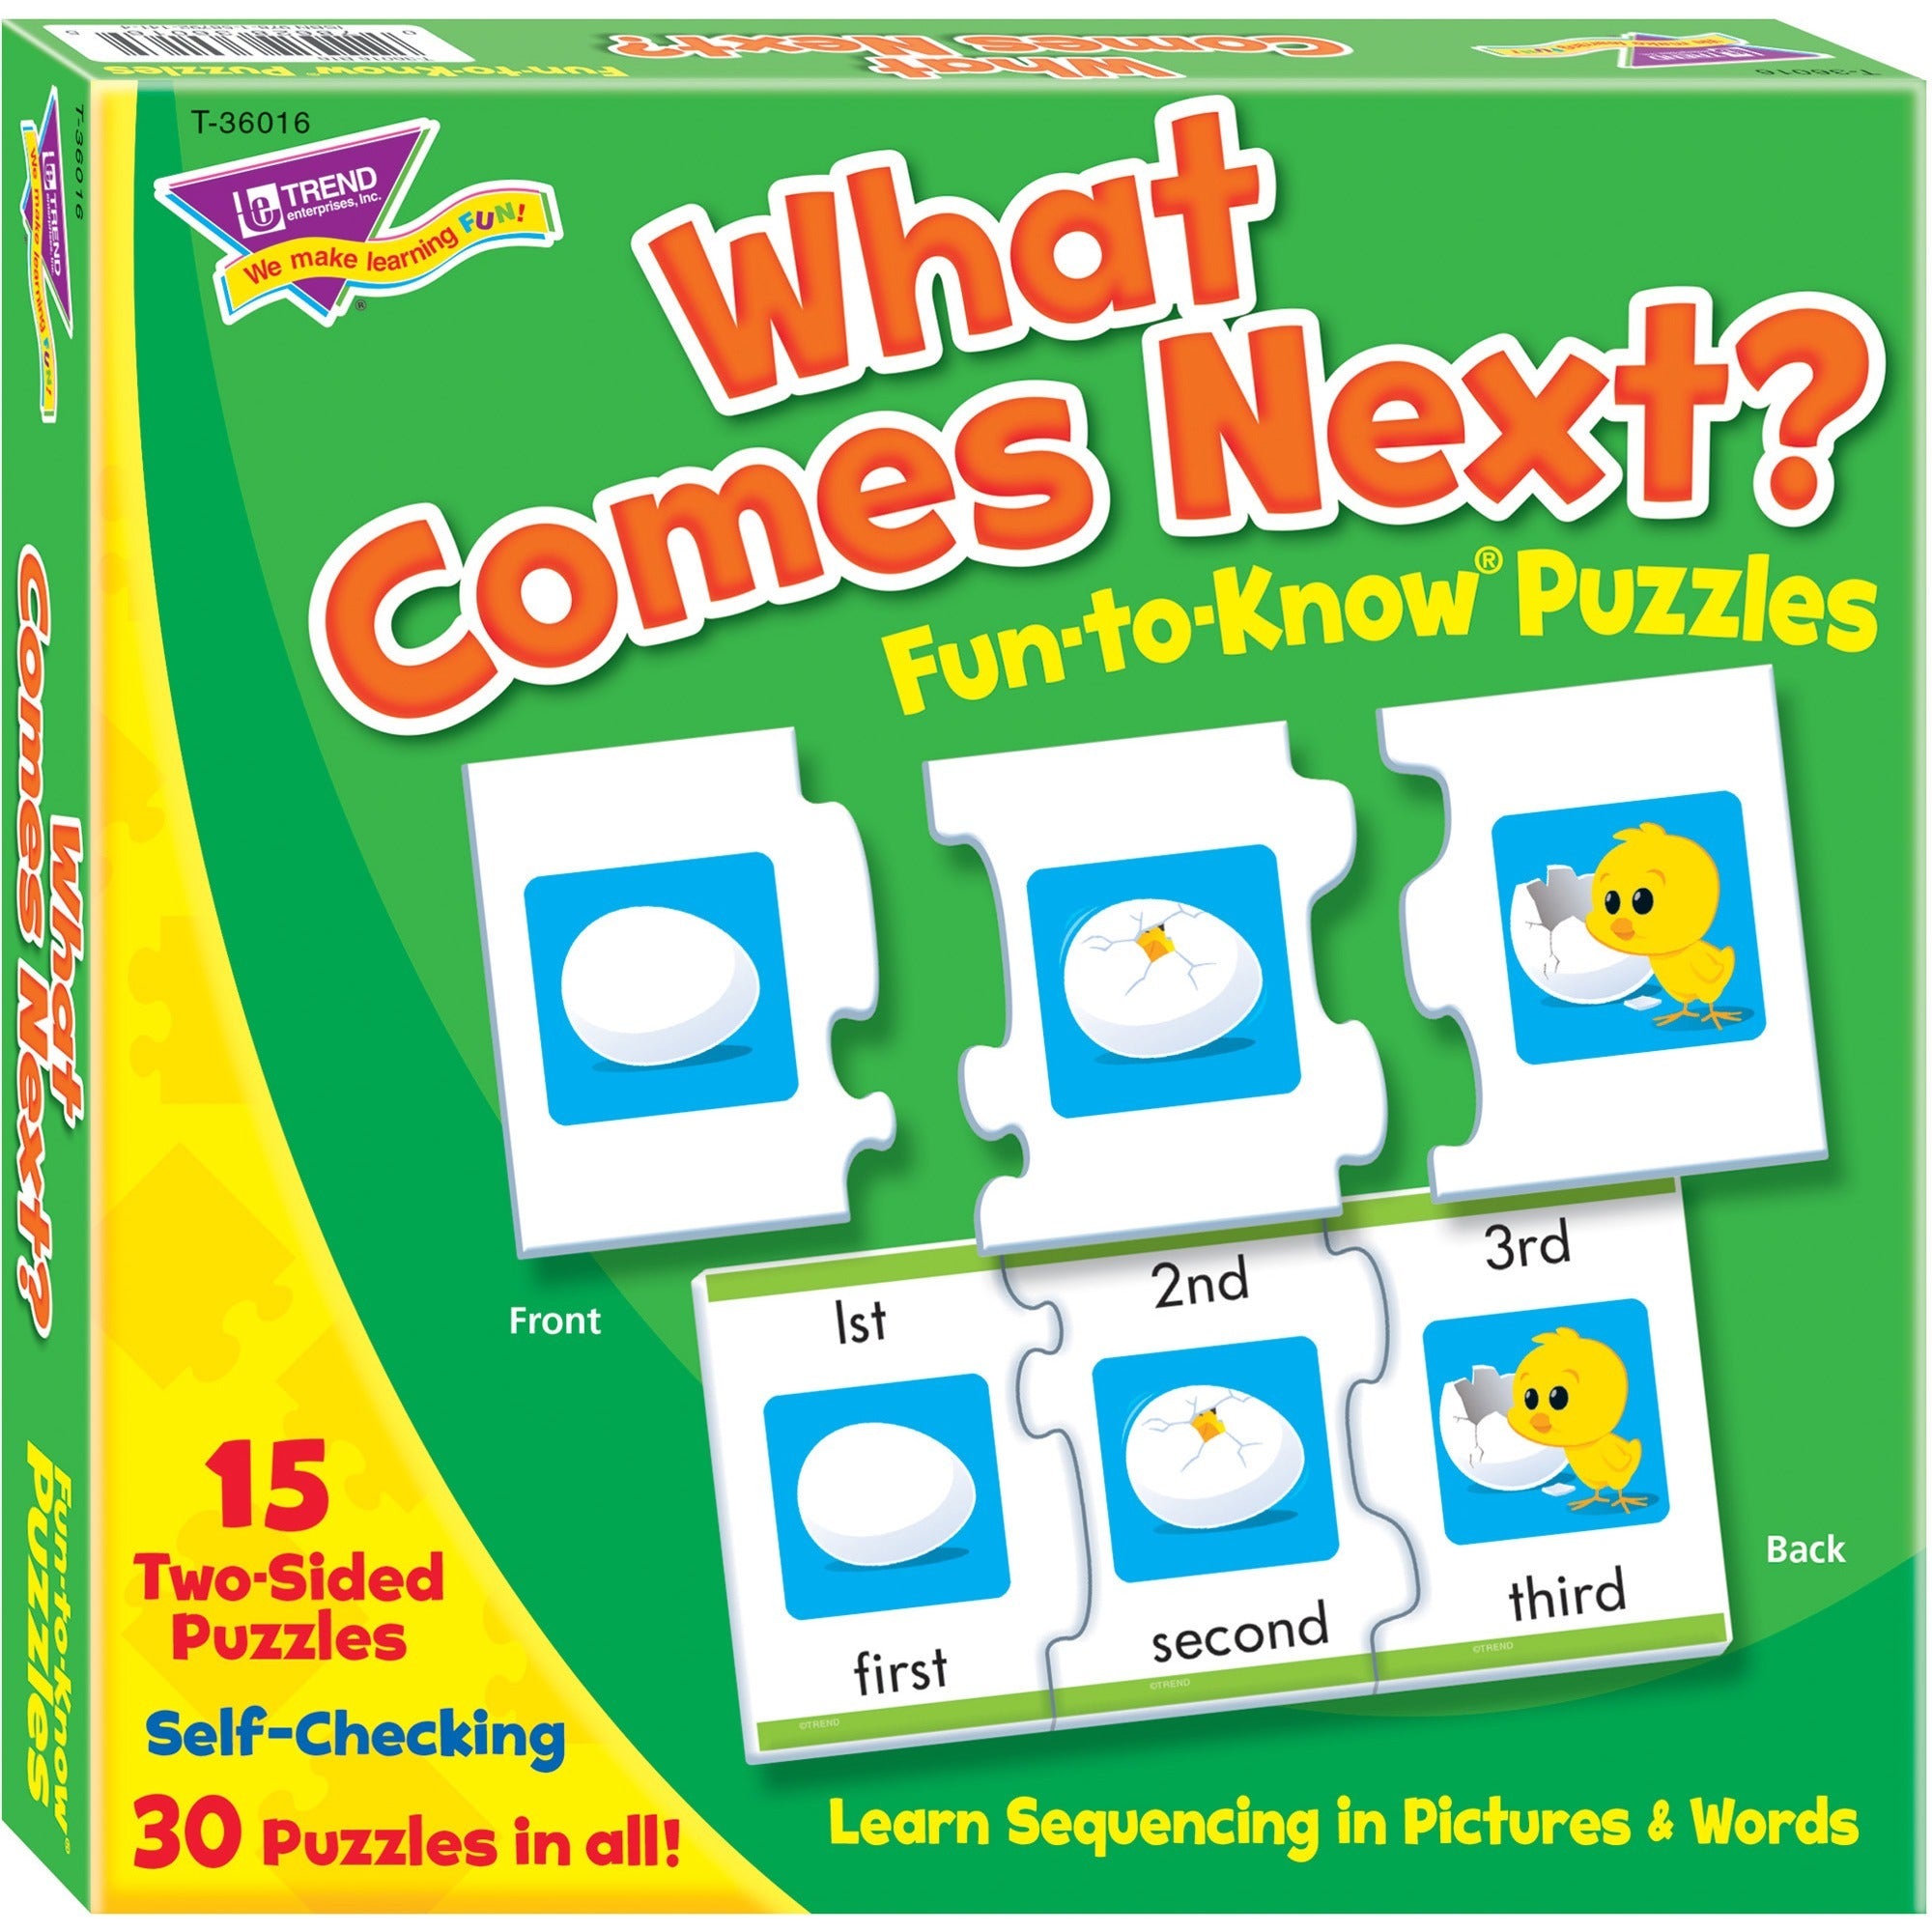 trend-what-comes-next-fun-to-know-puzzles-theme-subject-fun-learning-skill-learning-number-sequencing-word-4-year-&-up-45-pieces_tep36016 - 1